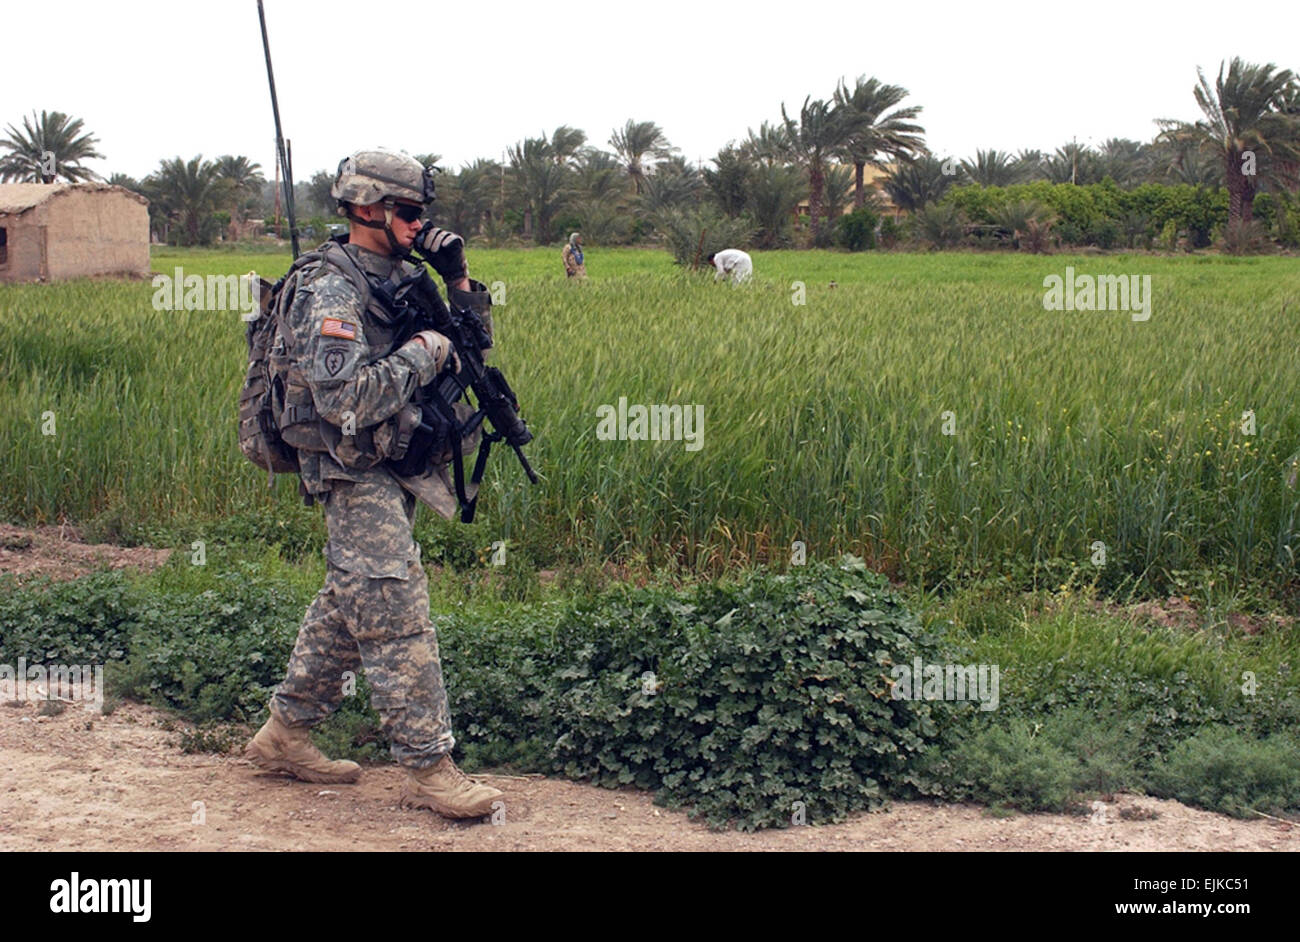 An Iraqi family works in a field as U.S. Army Sgt. Sean Reed, a team leader with 1st Squadron, 40th Cavalry Regiment, 4th Brigade Combat Team Airborne, 25th Infantry Division, strolls past during a reconnaissance patrol in Adwaniya, Iraq, April 7, 2007.  The 1/40th CAV is responsible for the security of the area surrounding the South Baghdad suburb.  Staff Sgt. Sean A. Foley Stock Photo